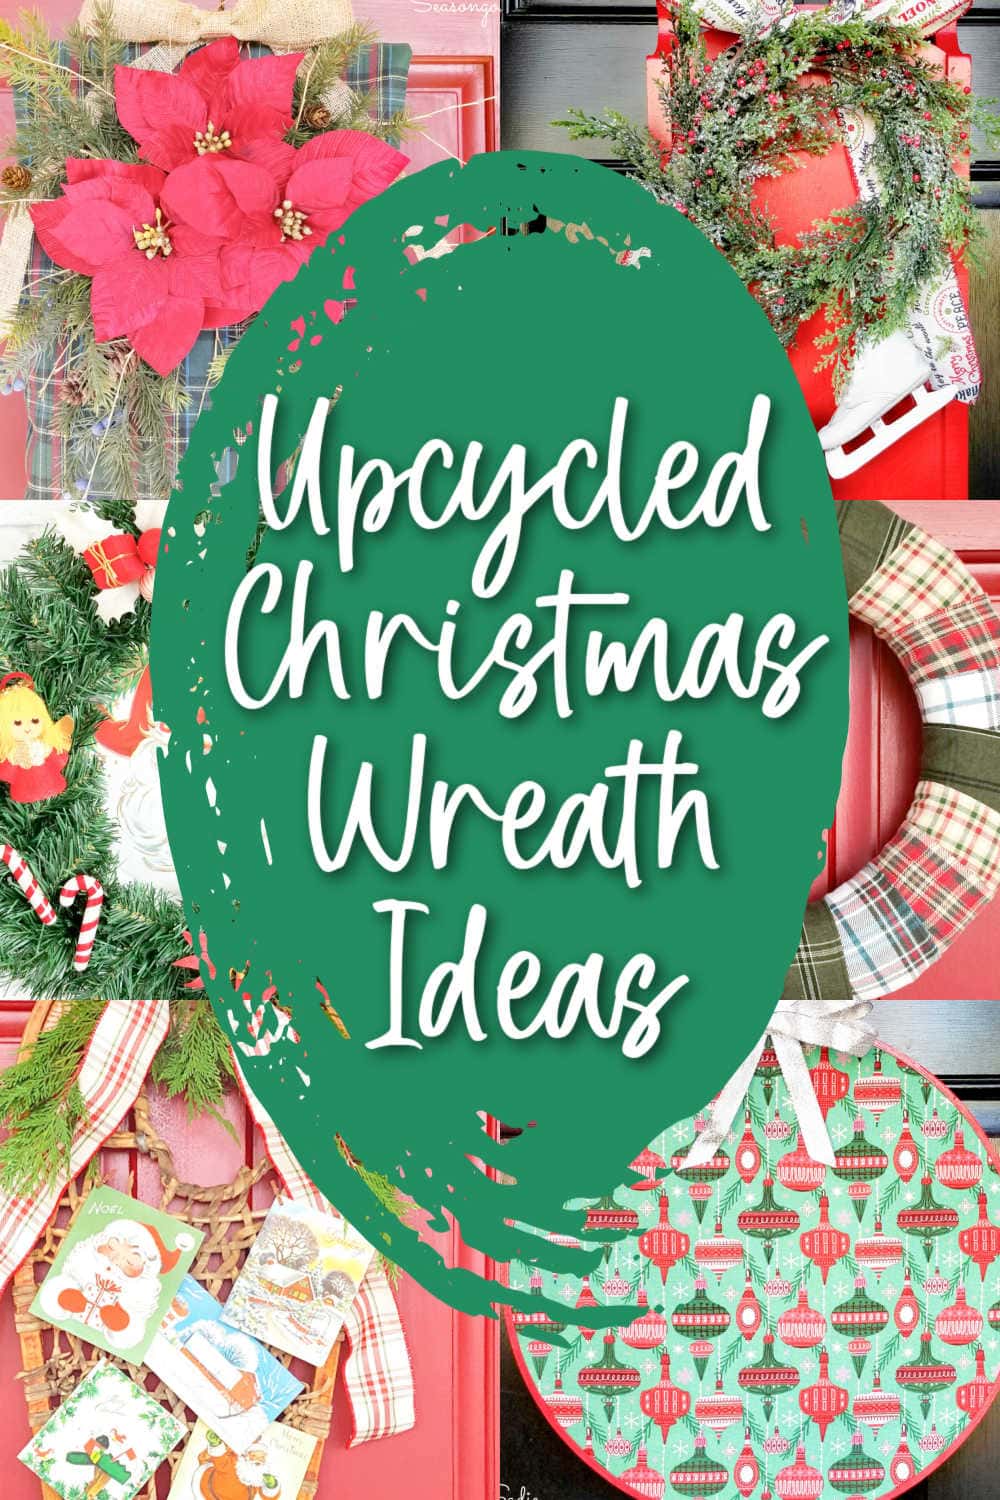 repurposed projects and diy inspiration for christmas wreaths ideas